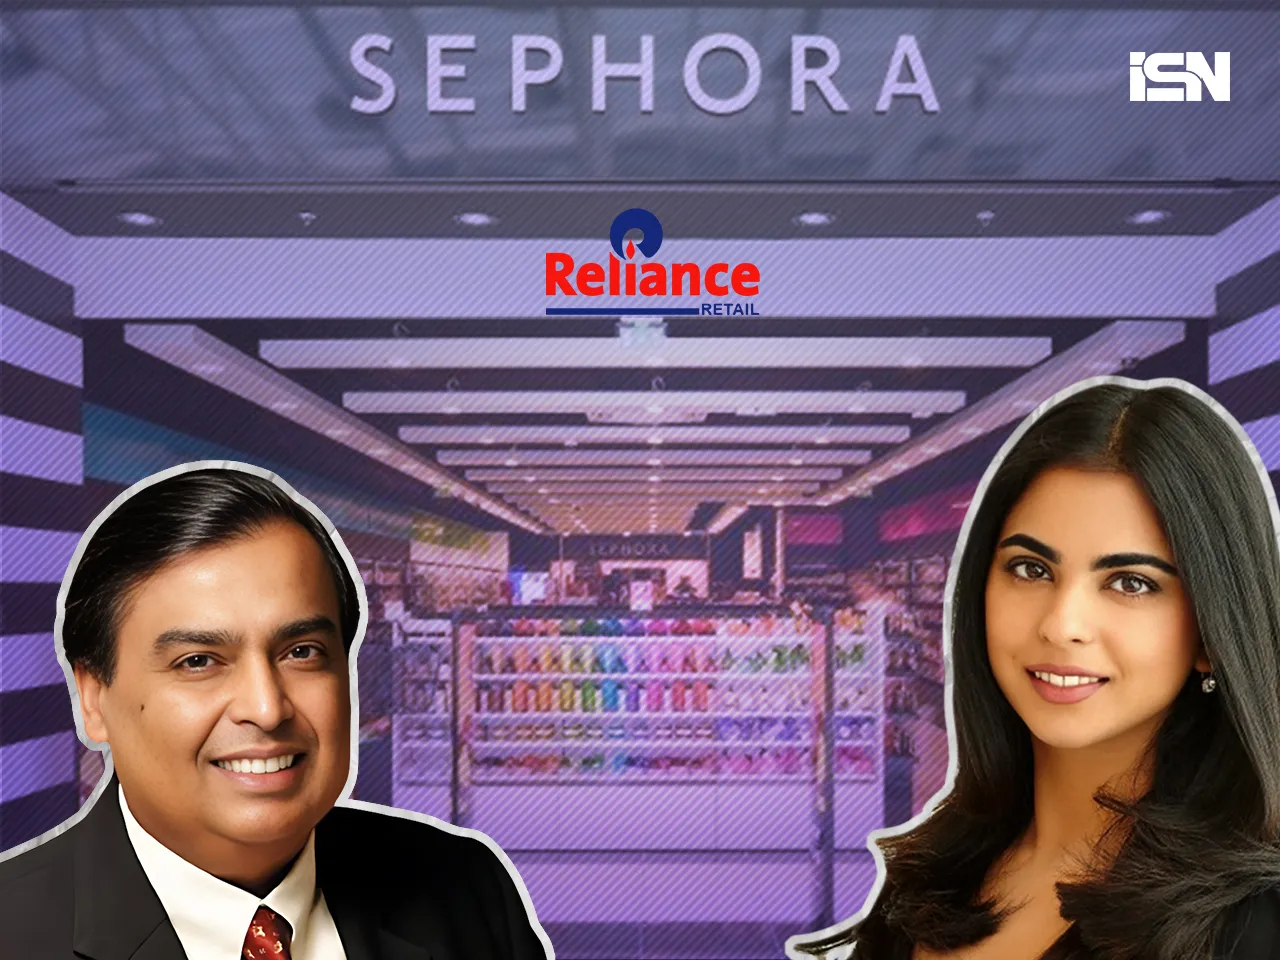 Ambani's Reliance Retail acquires Sephora India rights from Arvind Fashions for Rs 99 crore